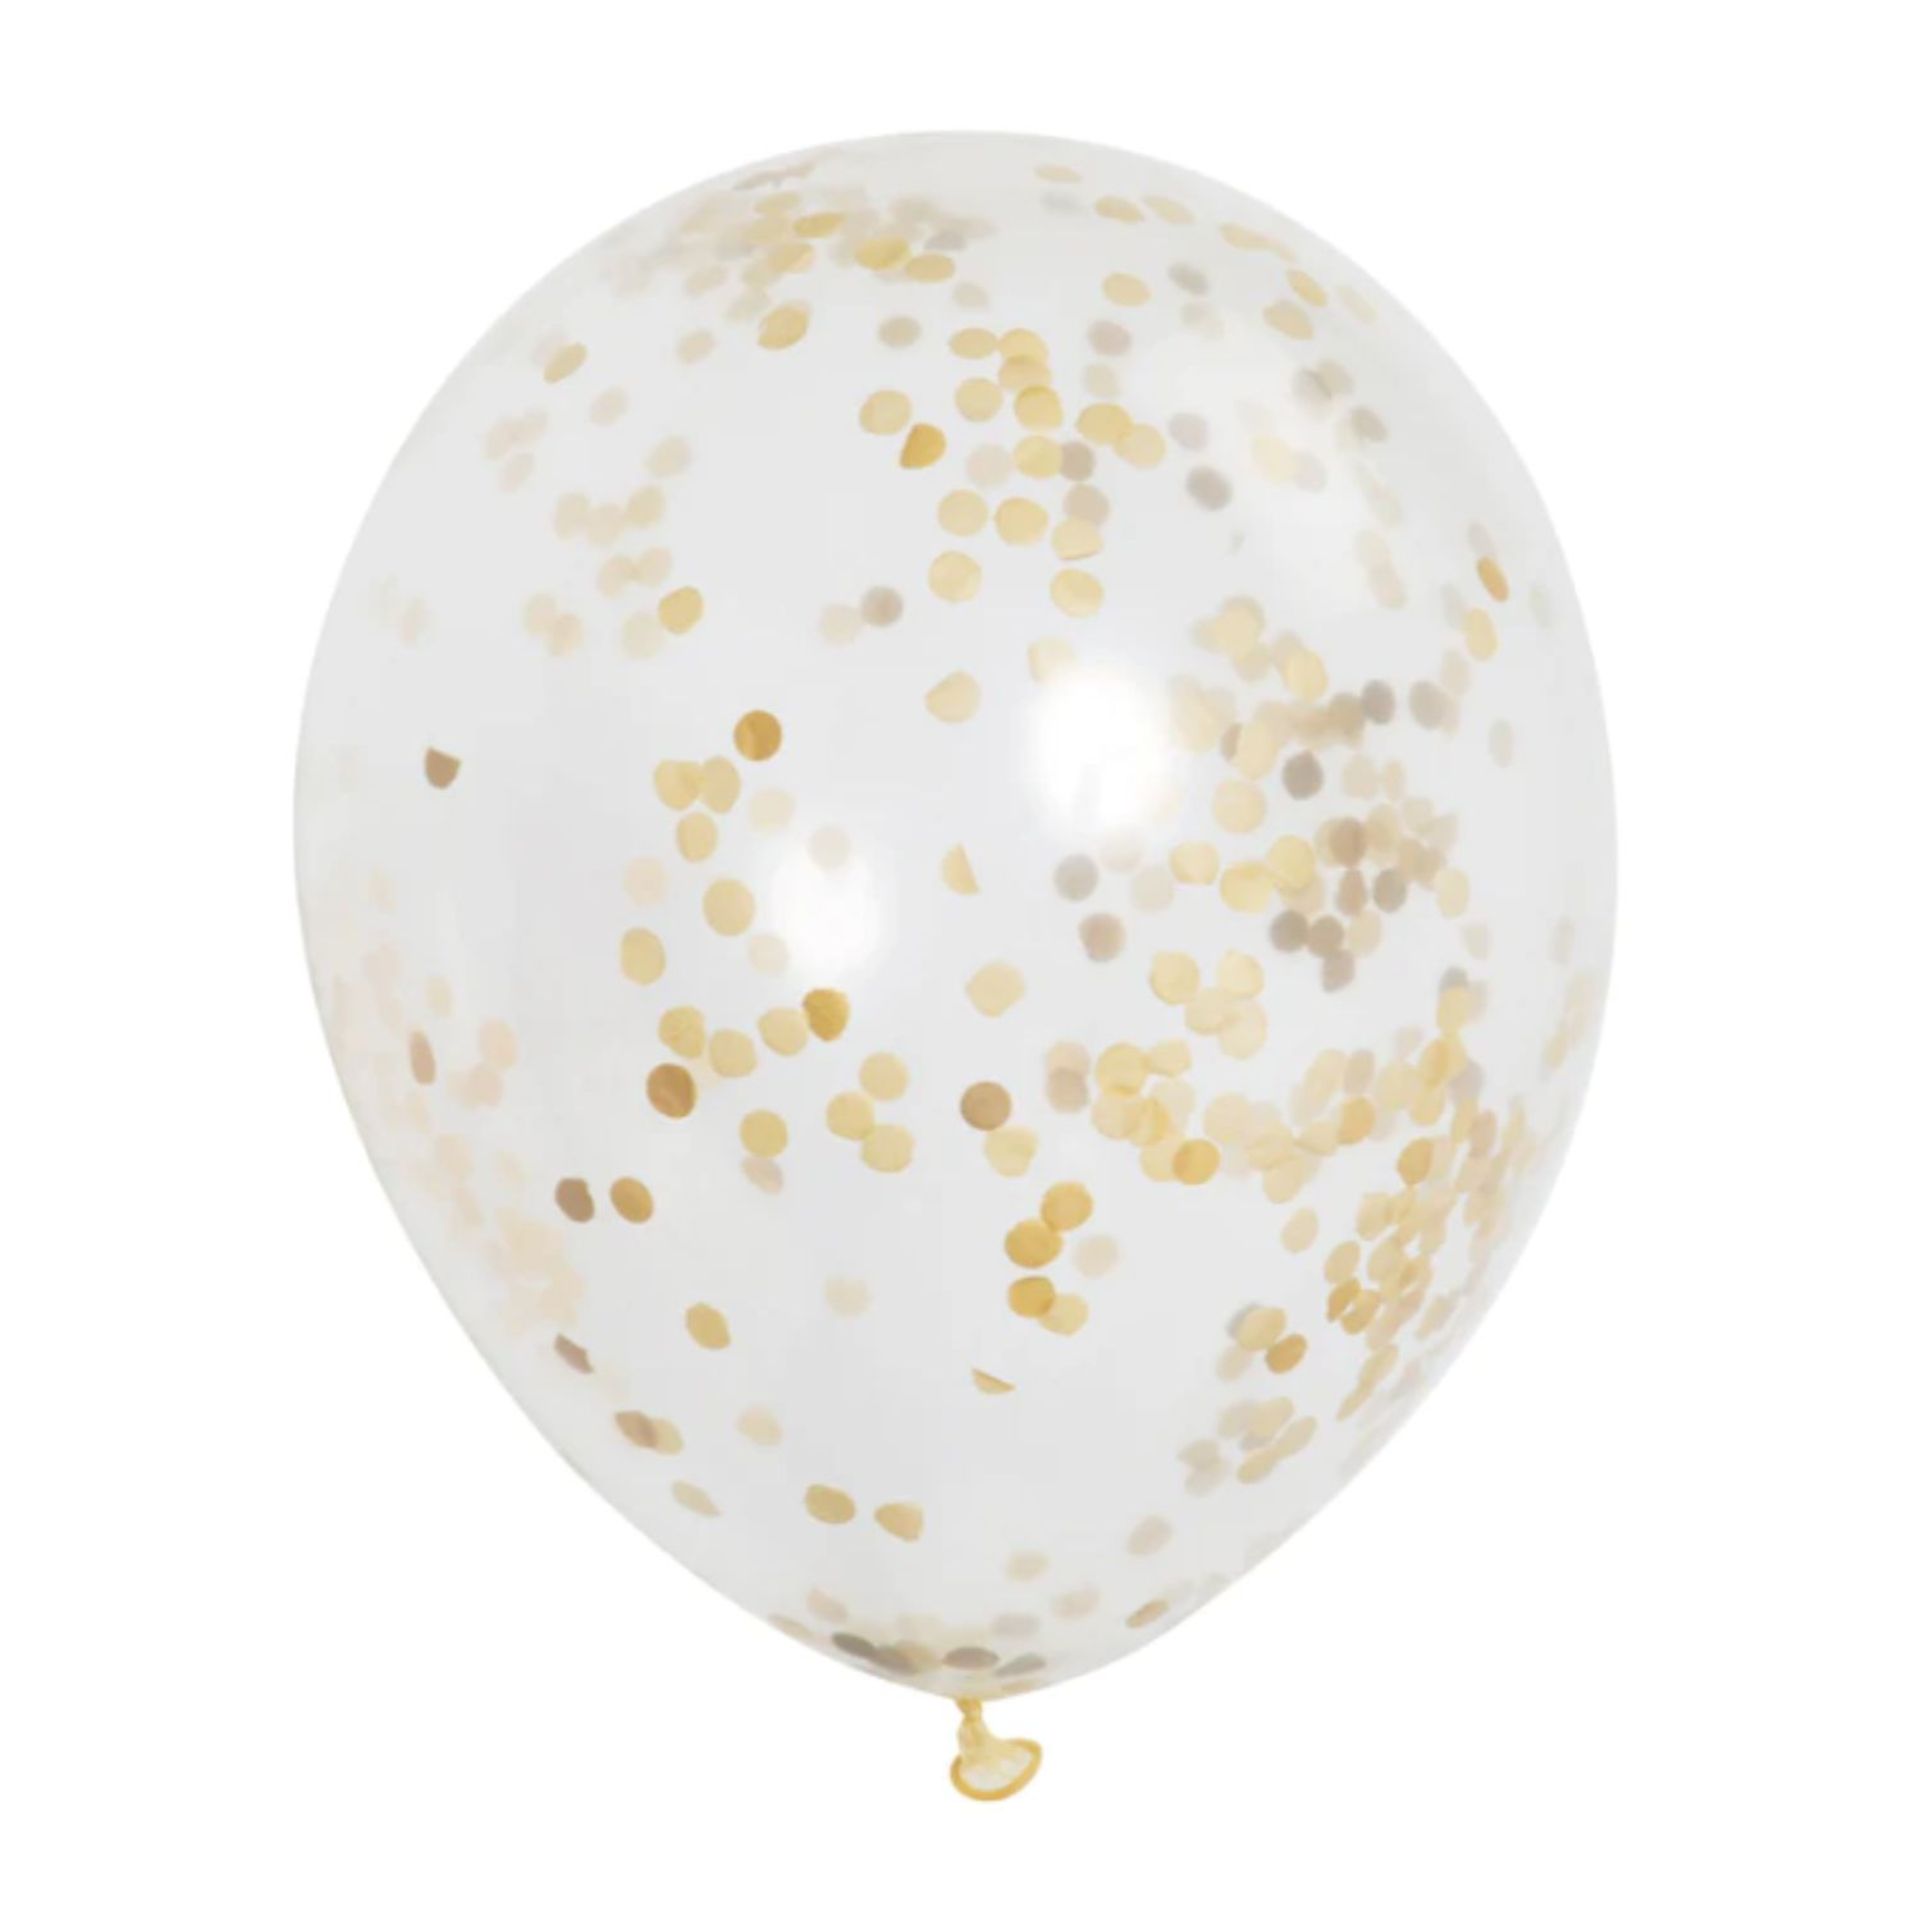 1000 PACKS OF LATEX SILVER AND GOLD CONFETTI BALLOONS, 12IN, 6CT, RRP £10,000 - Image 2 of 7